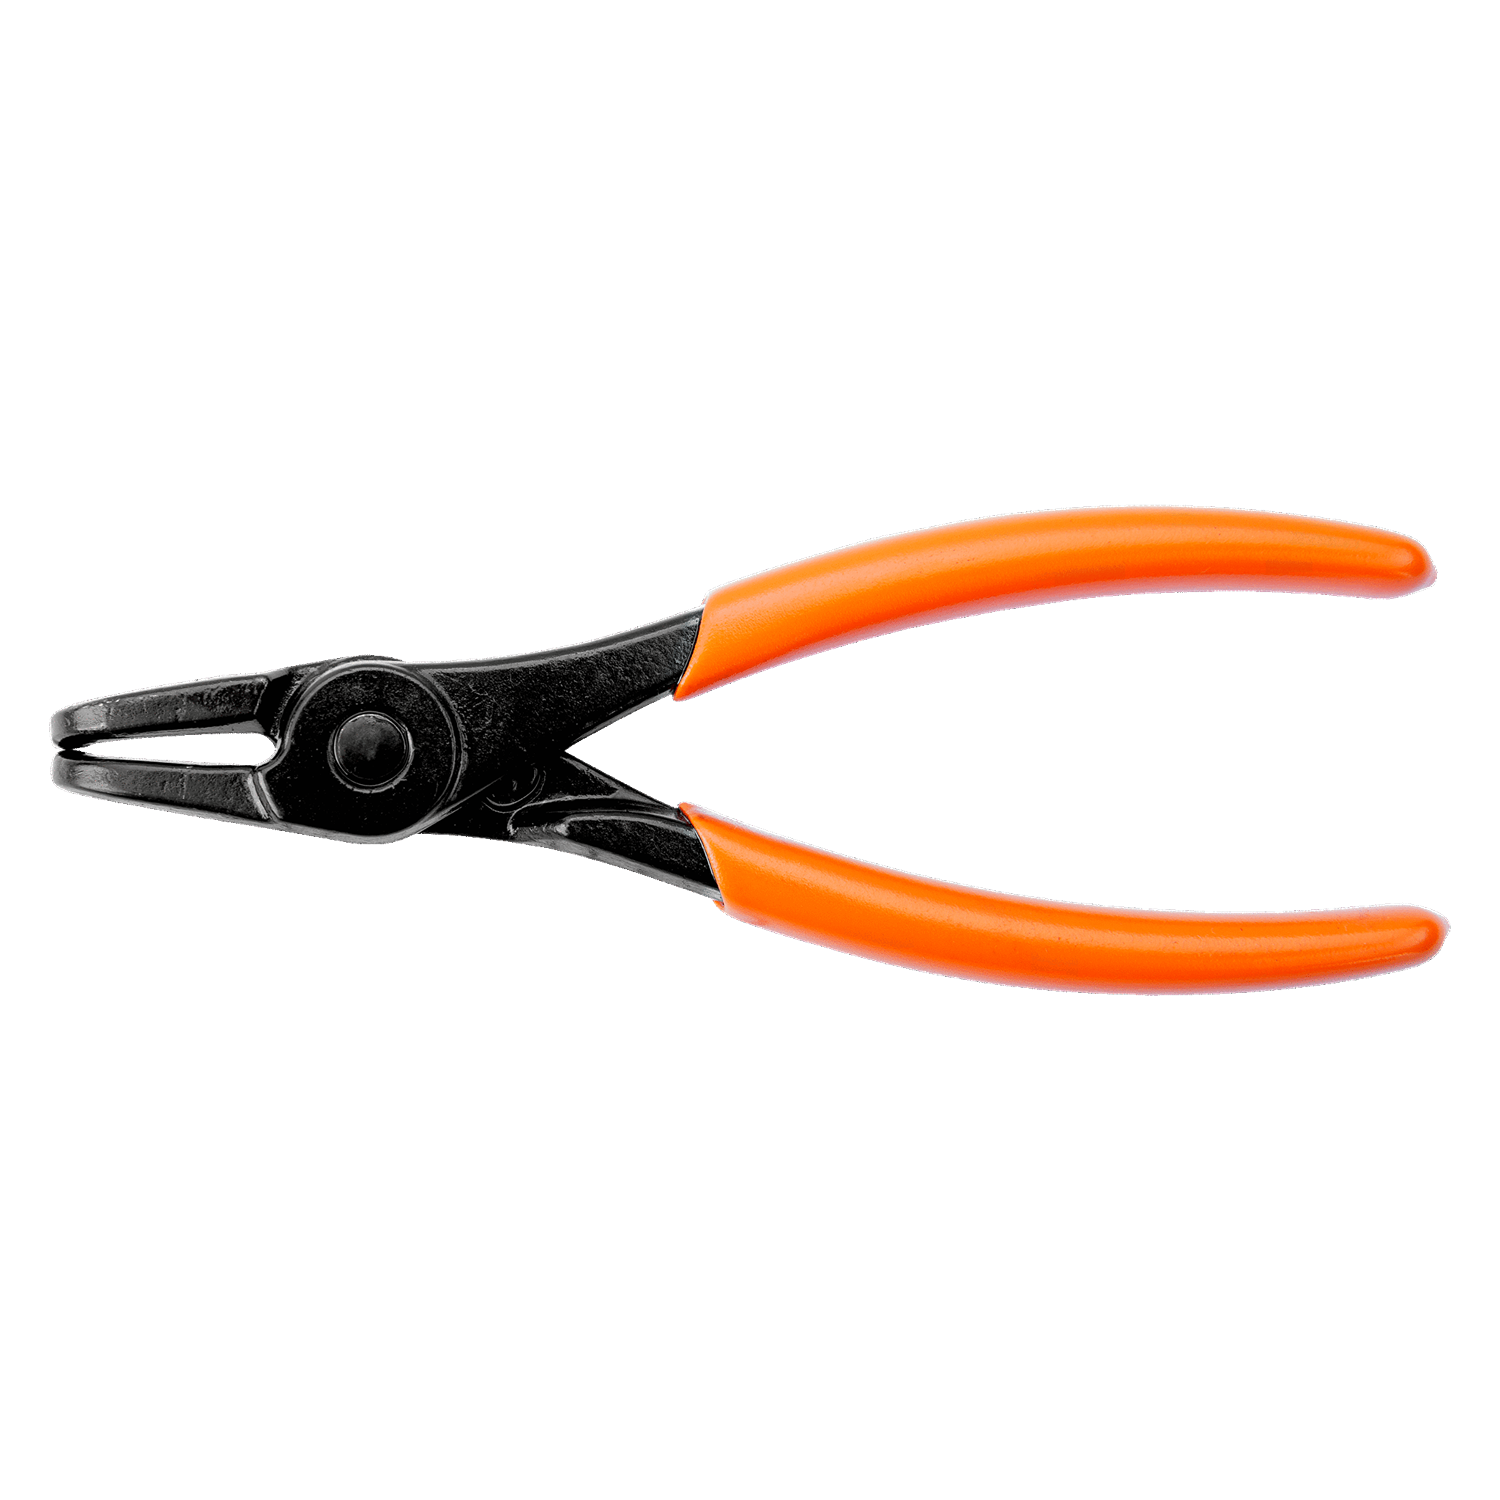 BAHCO 2890 Internal Circlip Plier with 90° Offset Jaws - Premium Circlip Plier from BAHCO - Shop now at Yew Aik.